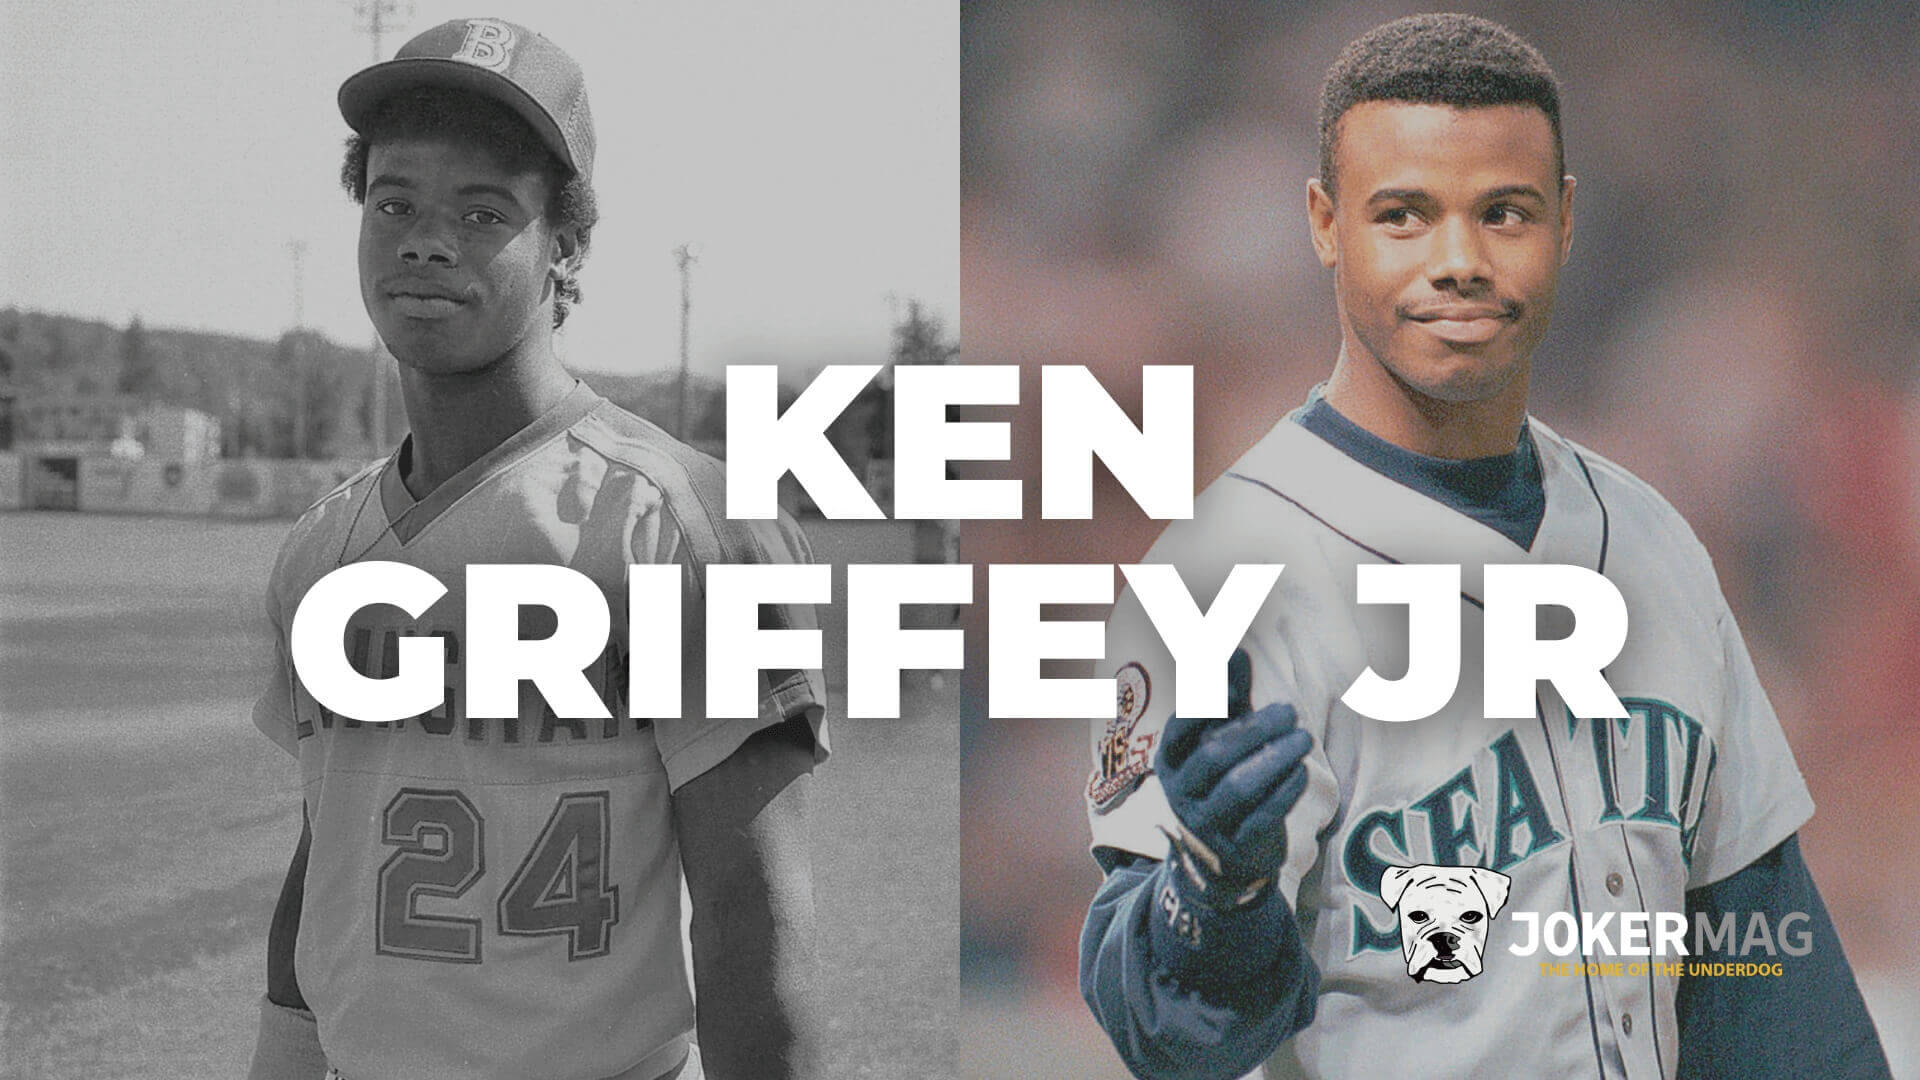 The story of how Ken Griffey Jr became a Yankee killer